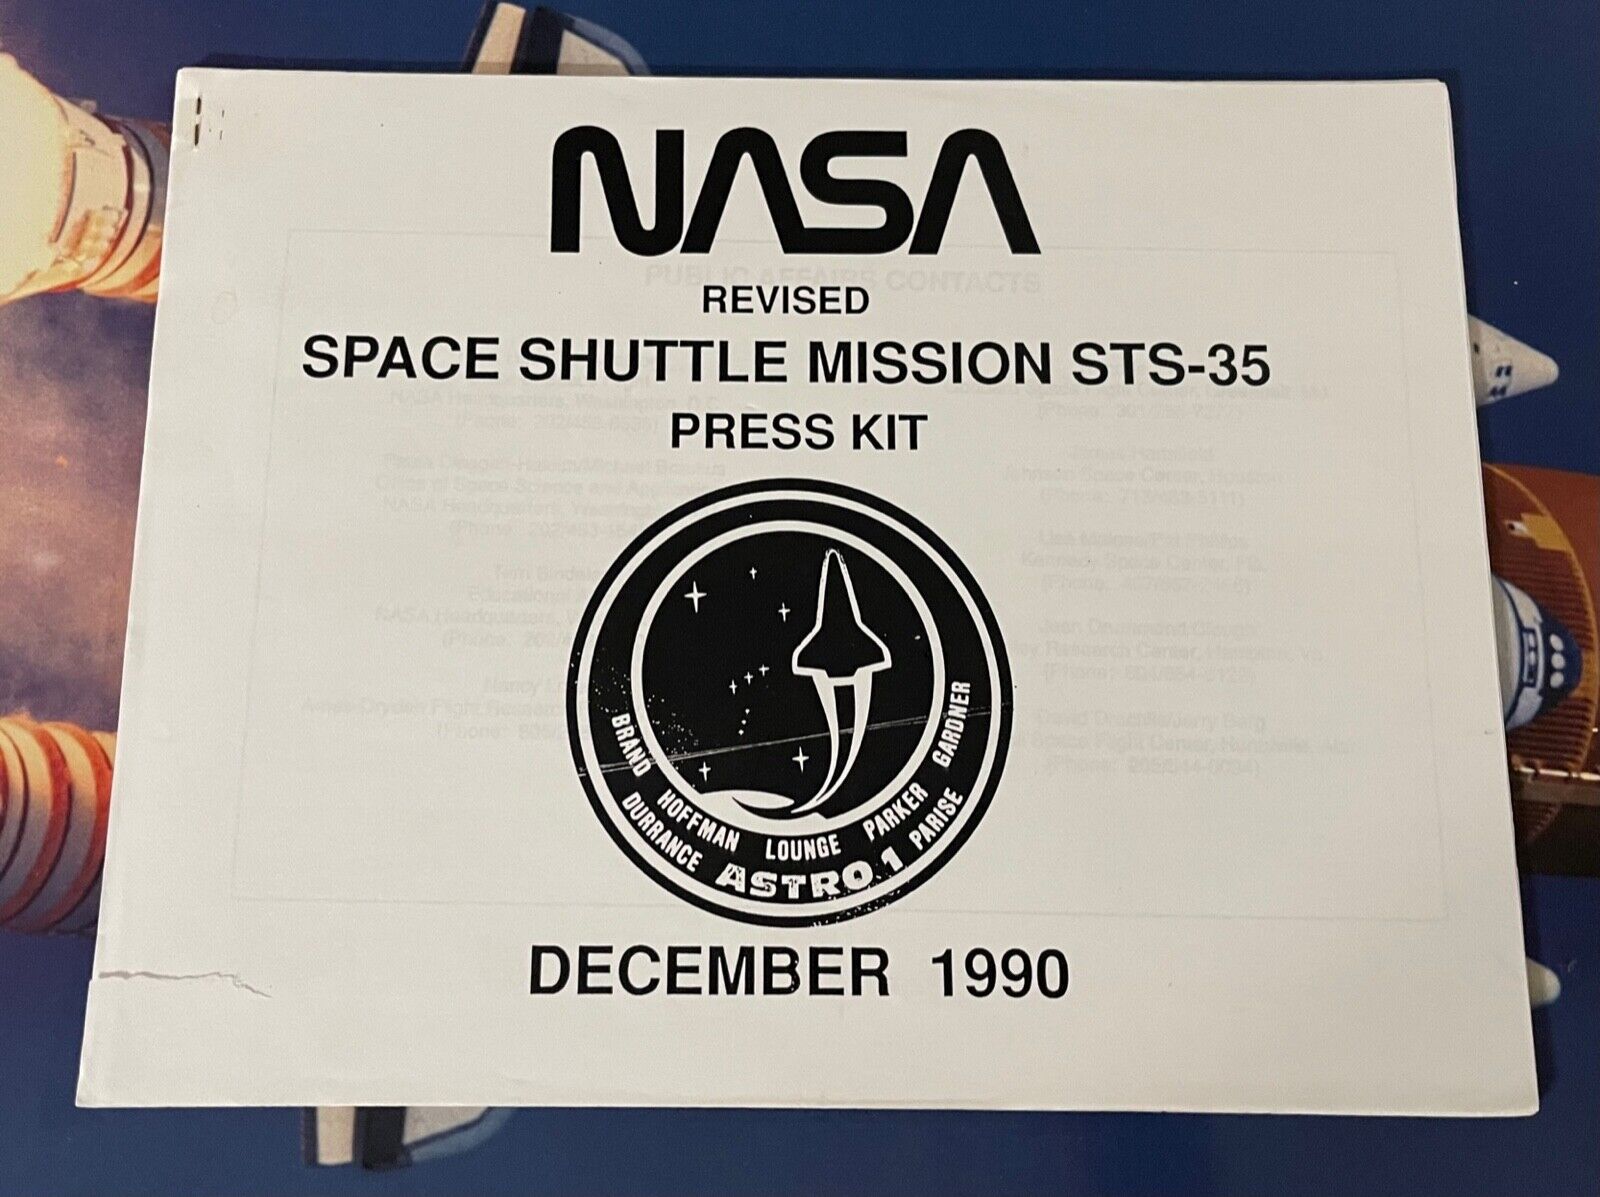 STS-35 NASA RELEASED SPACE SHUTTLE MISSION PRESS KIT